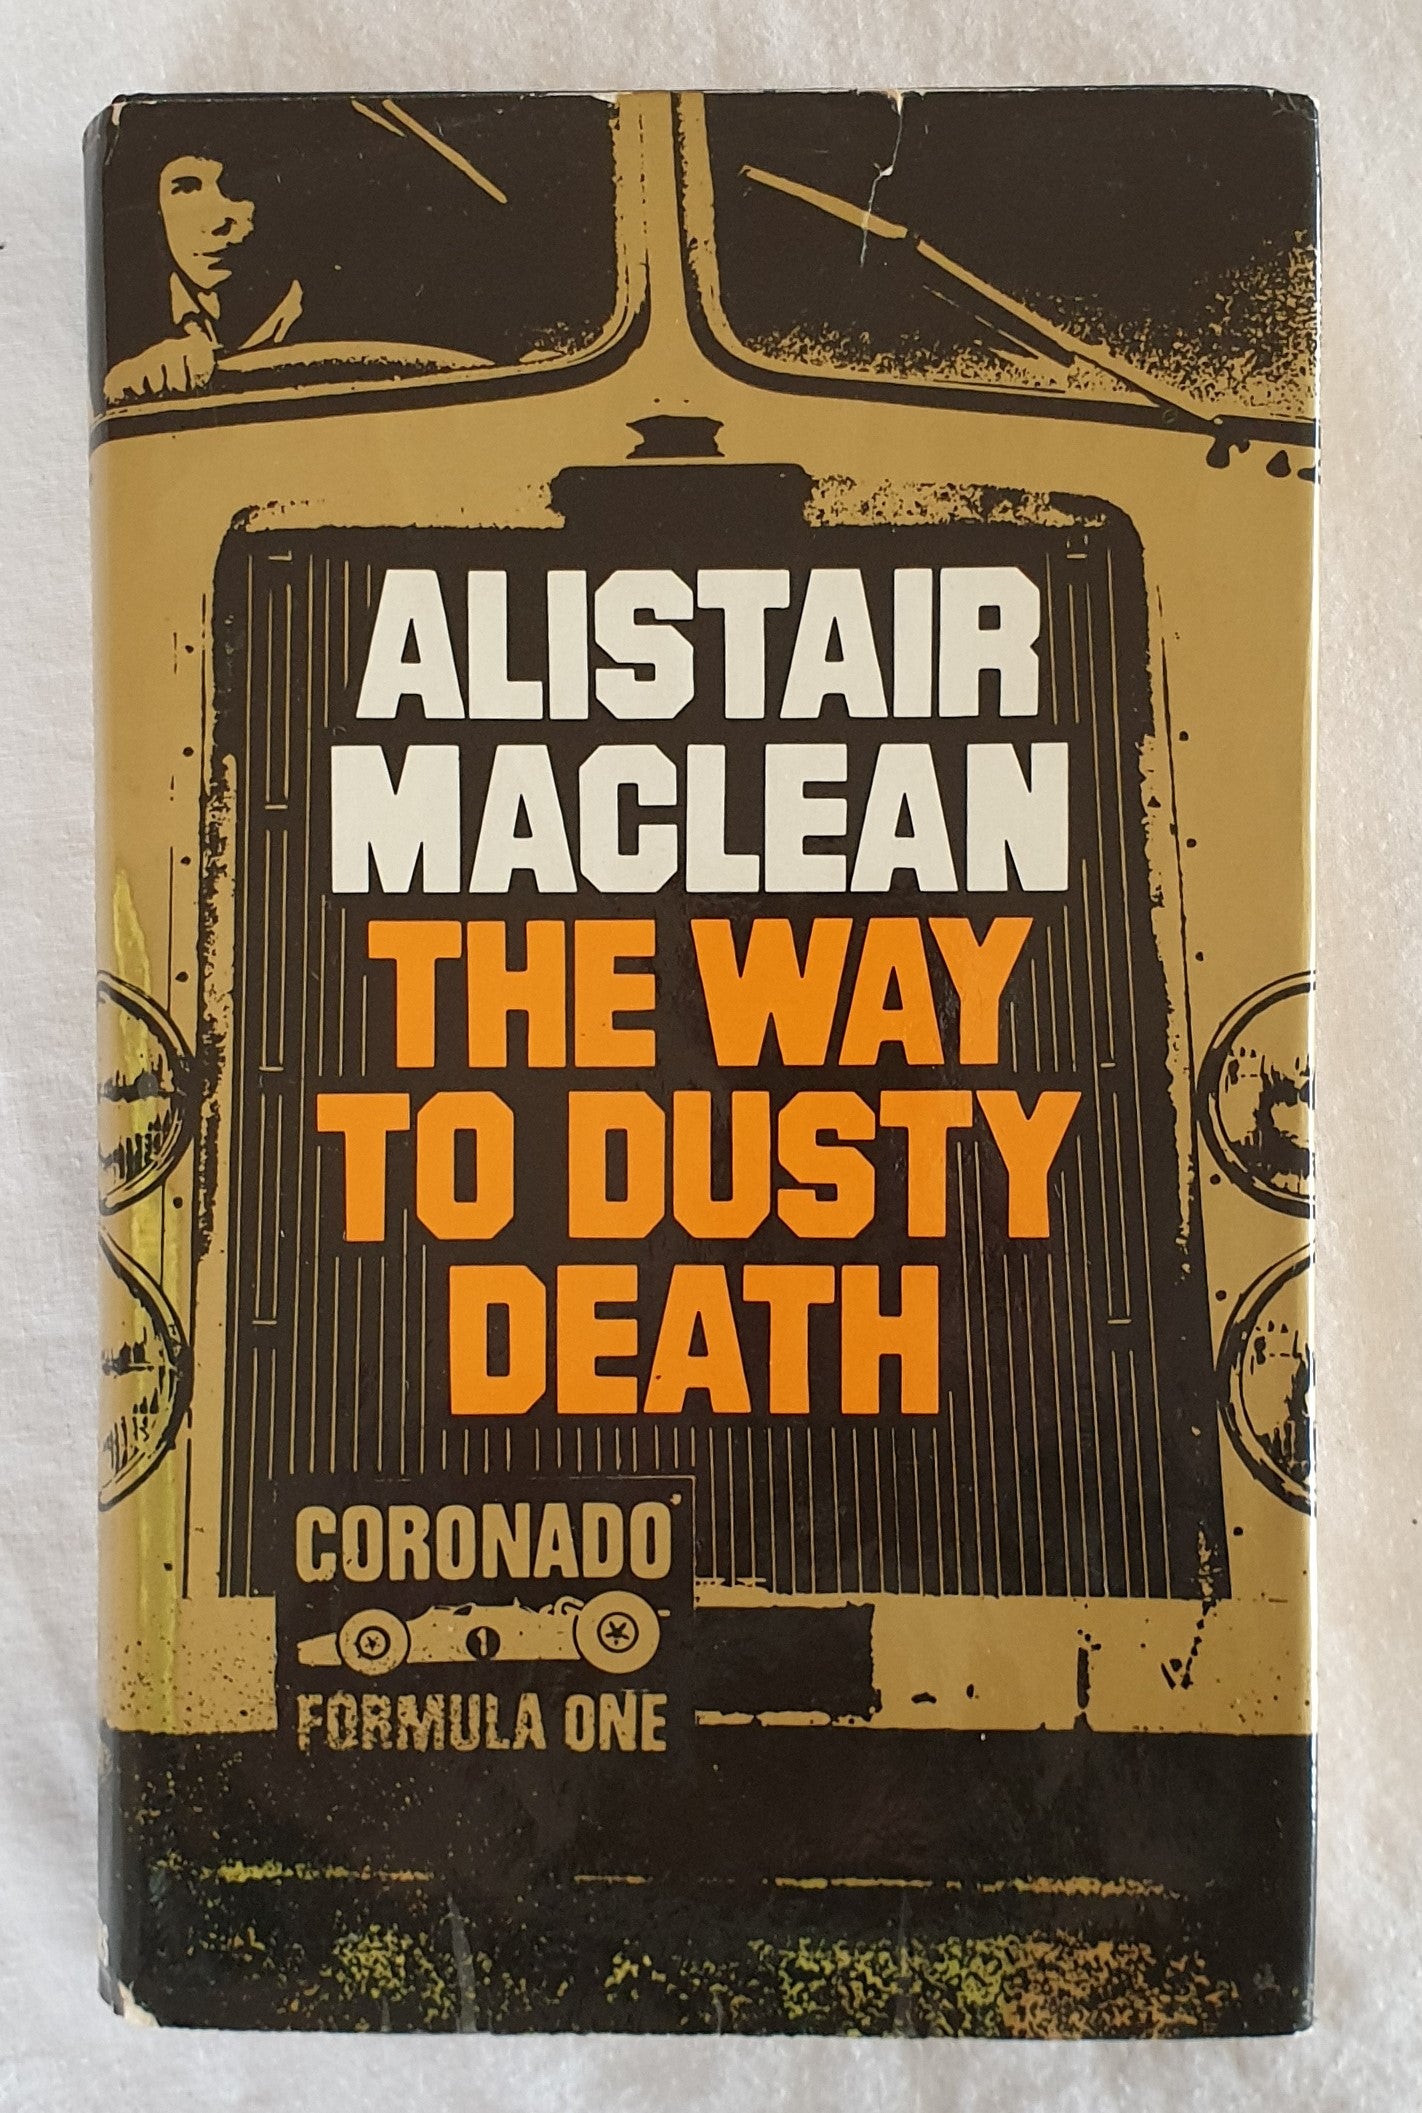 The Way To Dusty Death by Alistair Maclean